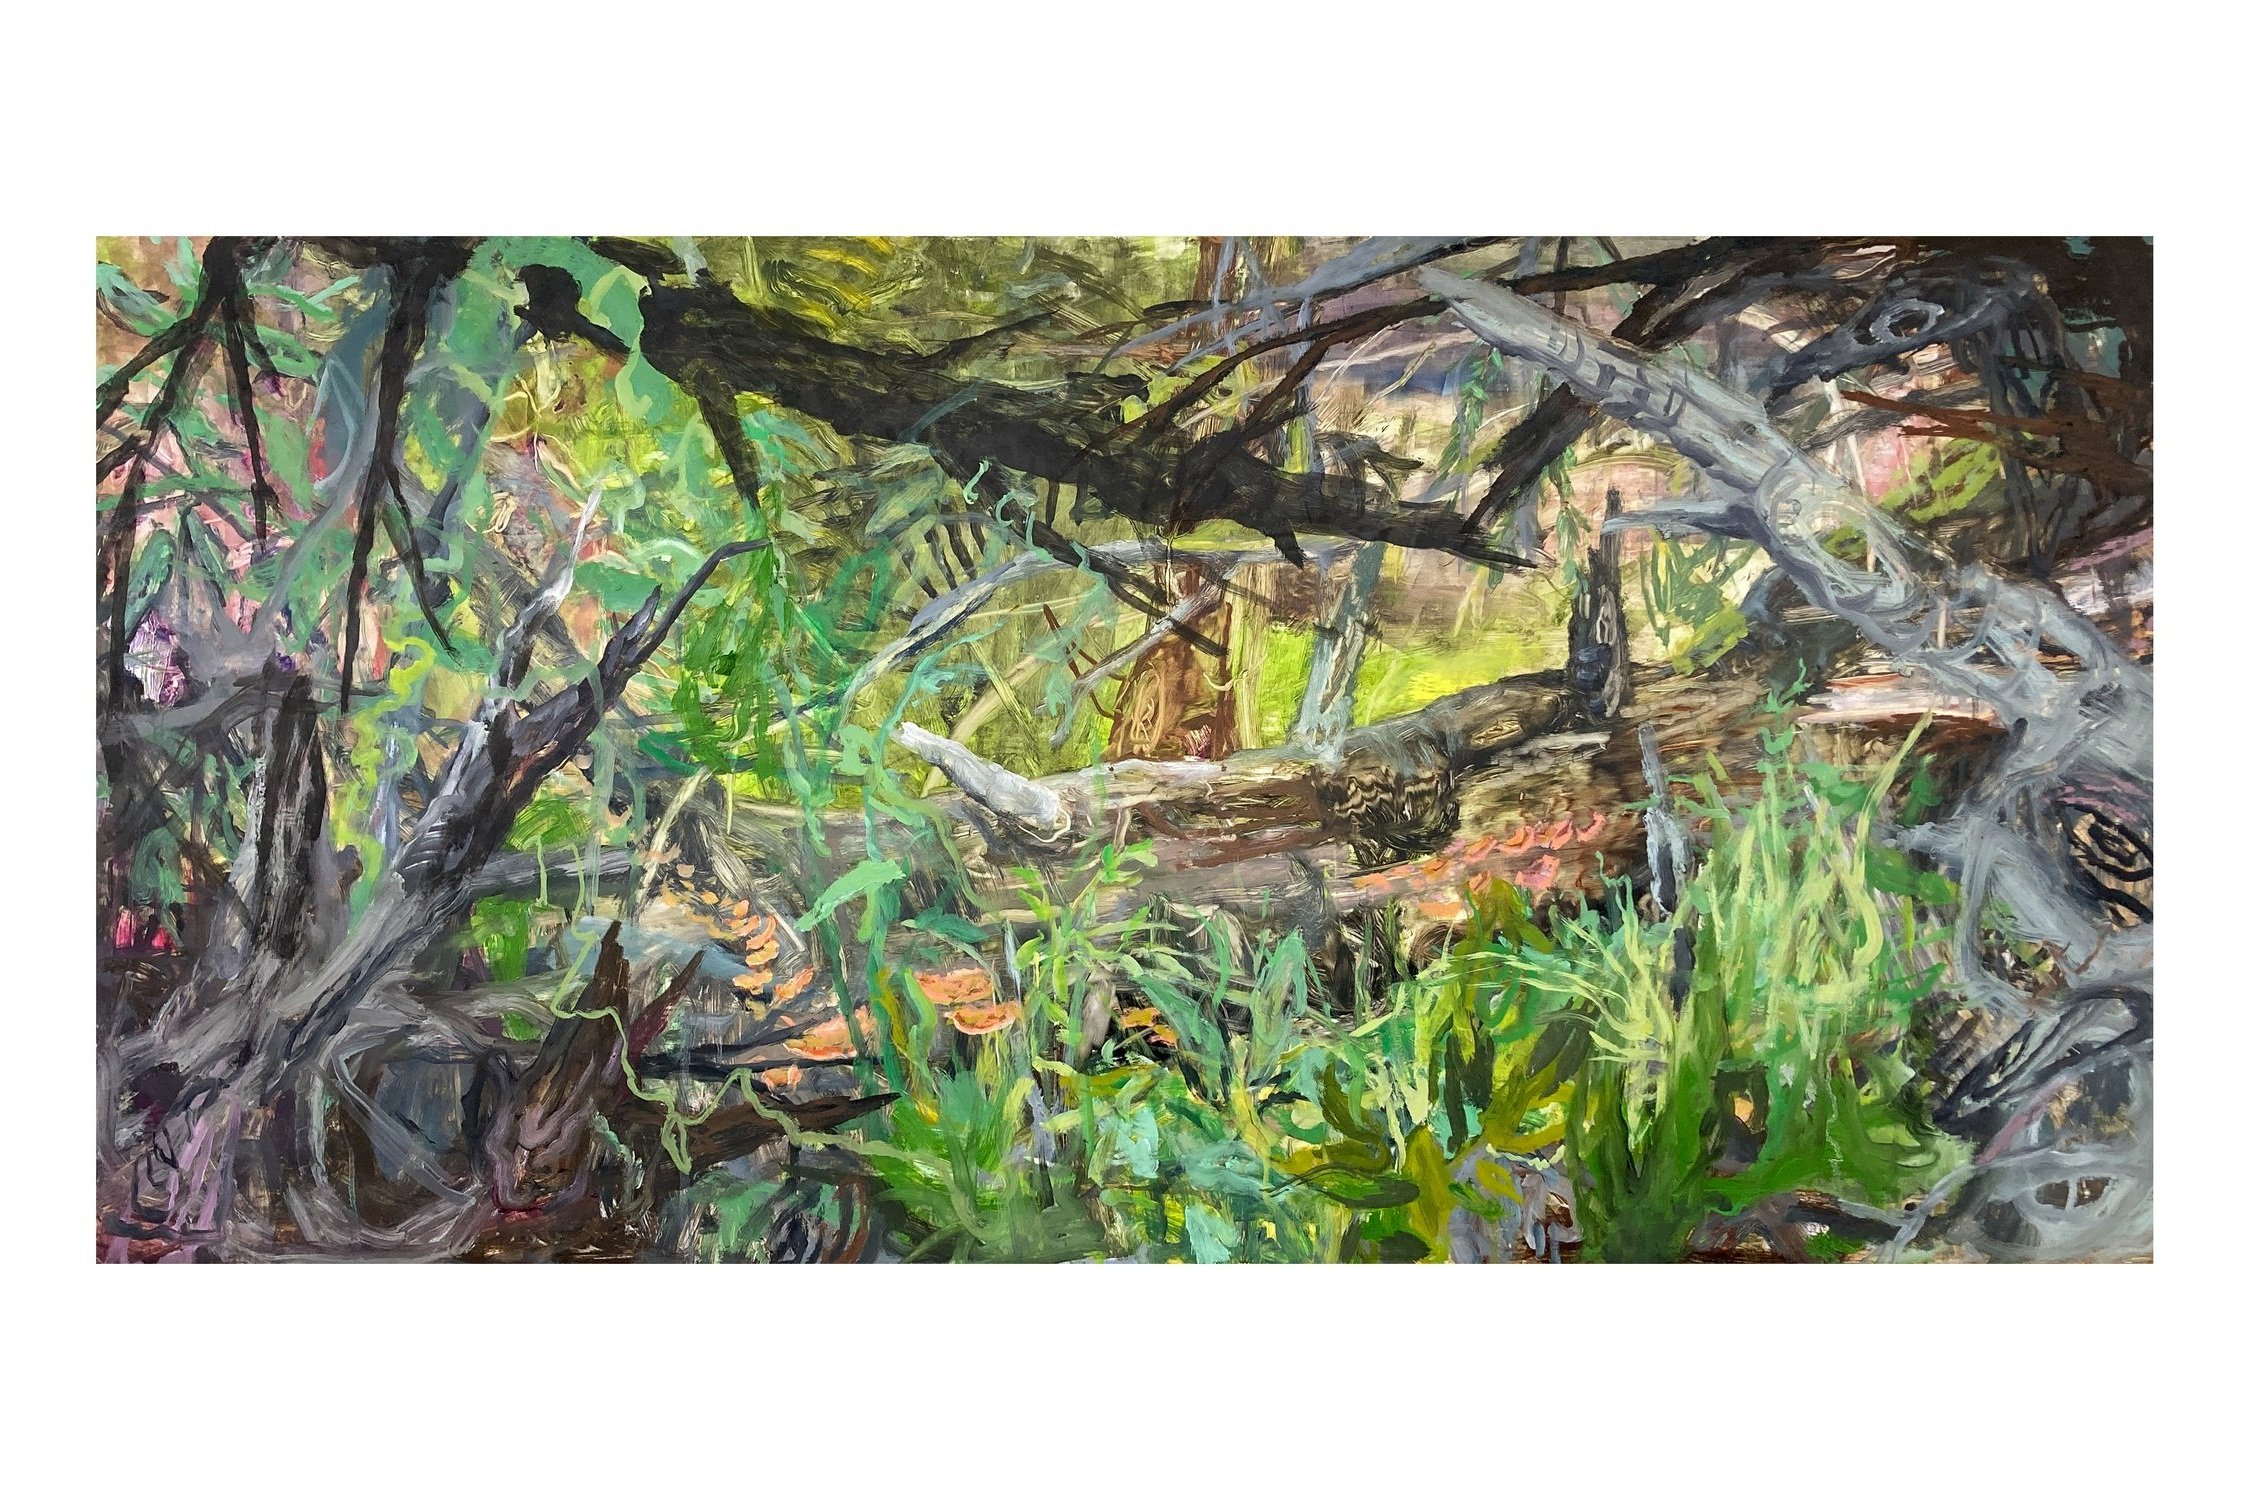  Late Summer Forage  2021, 24x48”, oil on yupo panel 